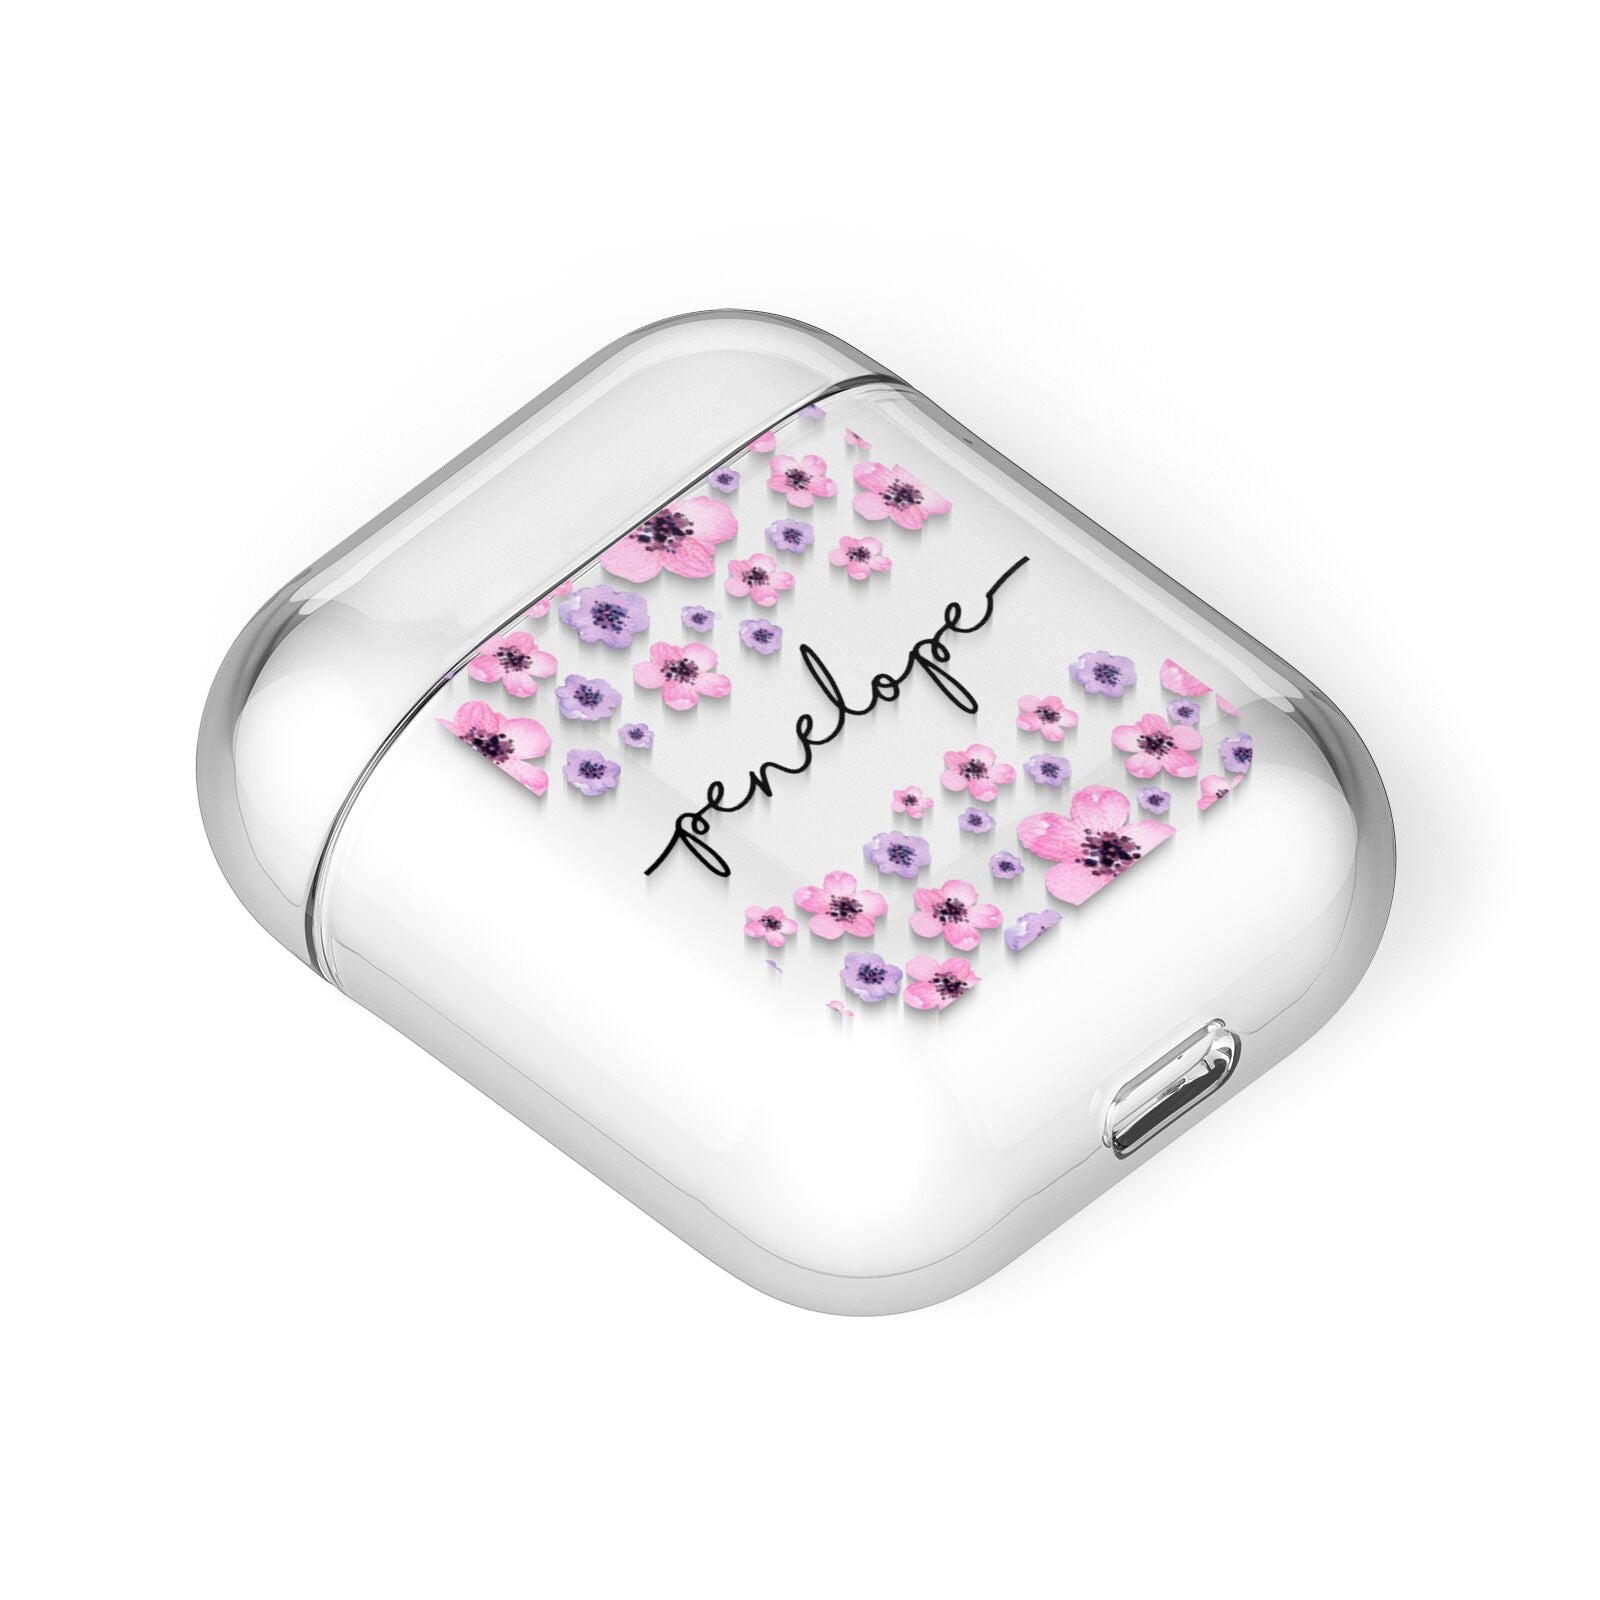 Personalised Pink Floral AirPods Case Laid Flat